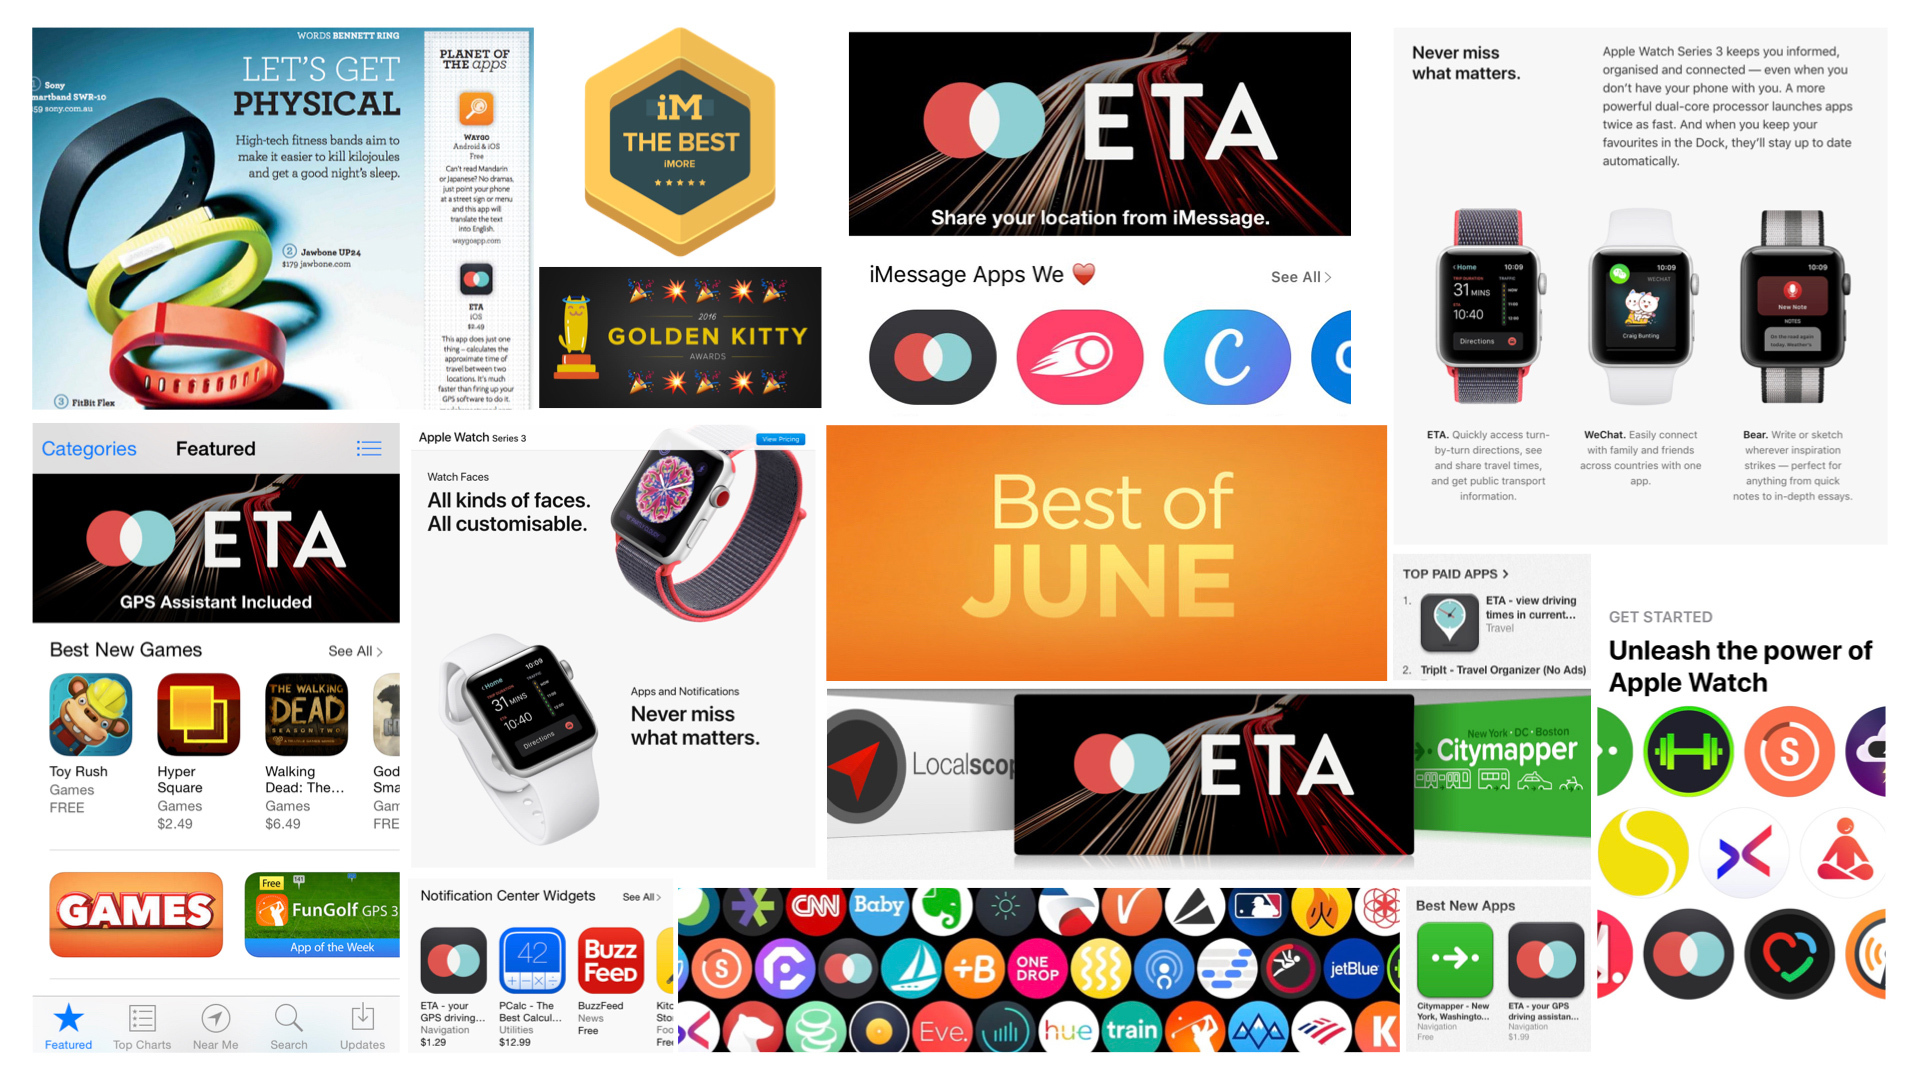 App Store features, awards, press write-ups